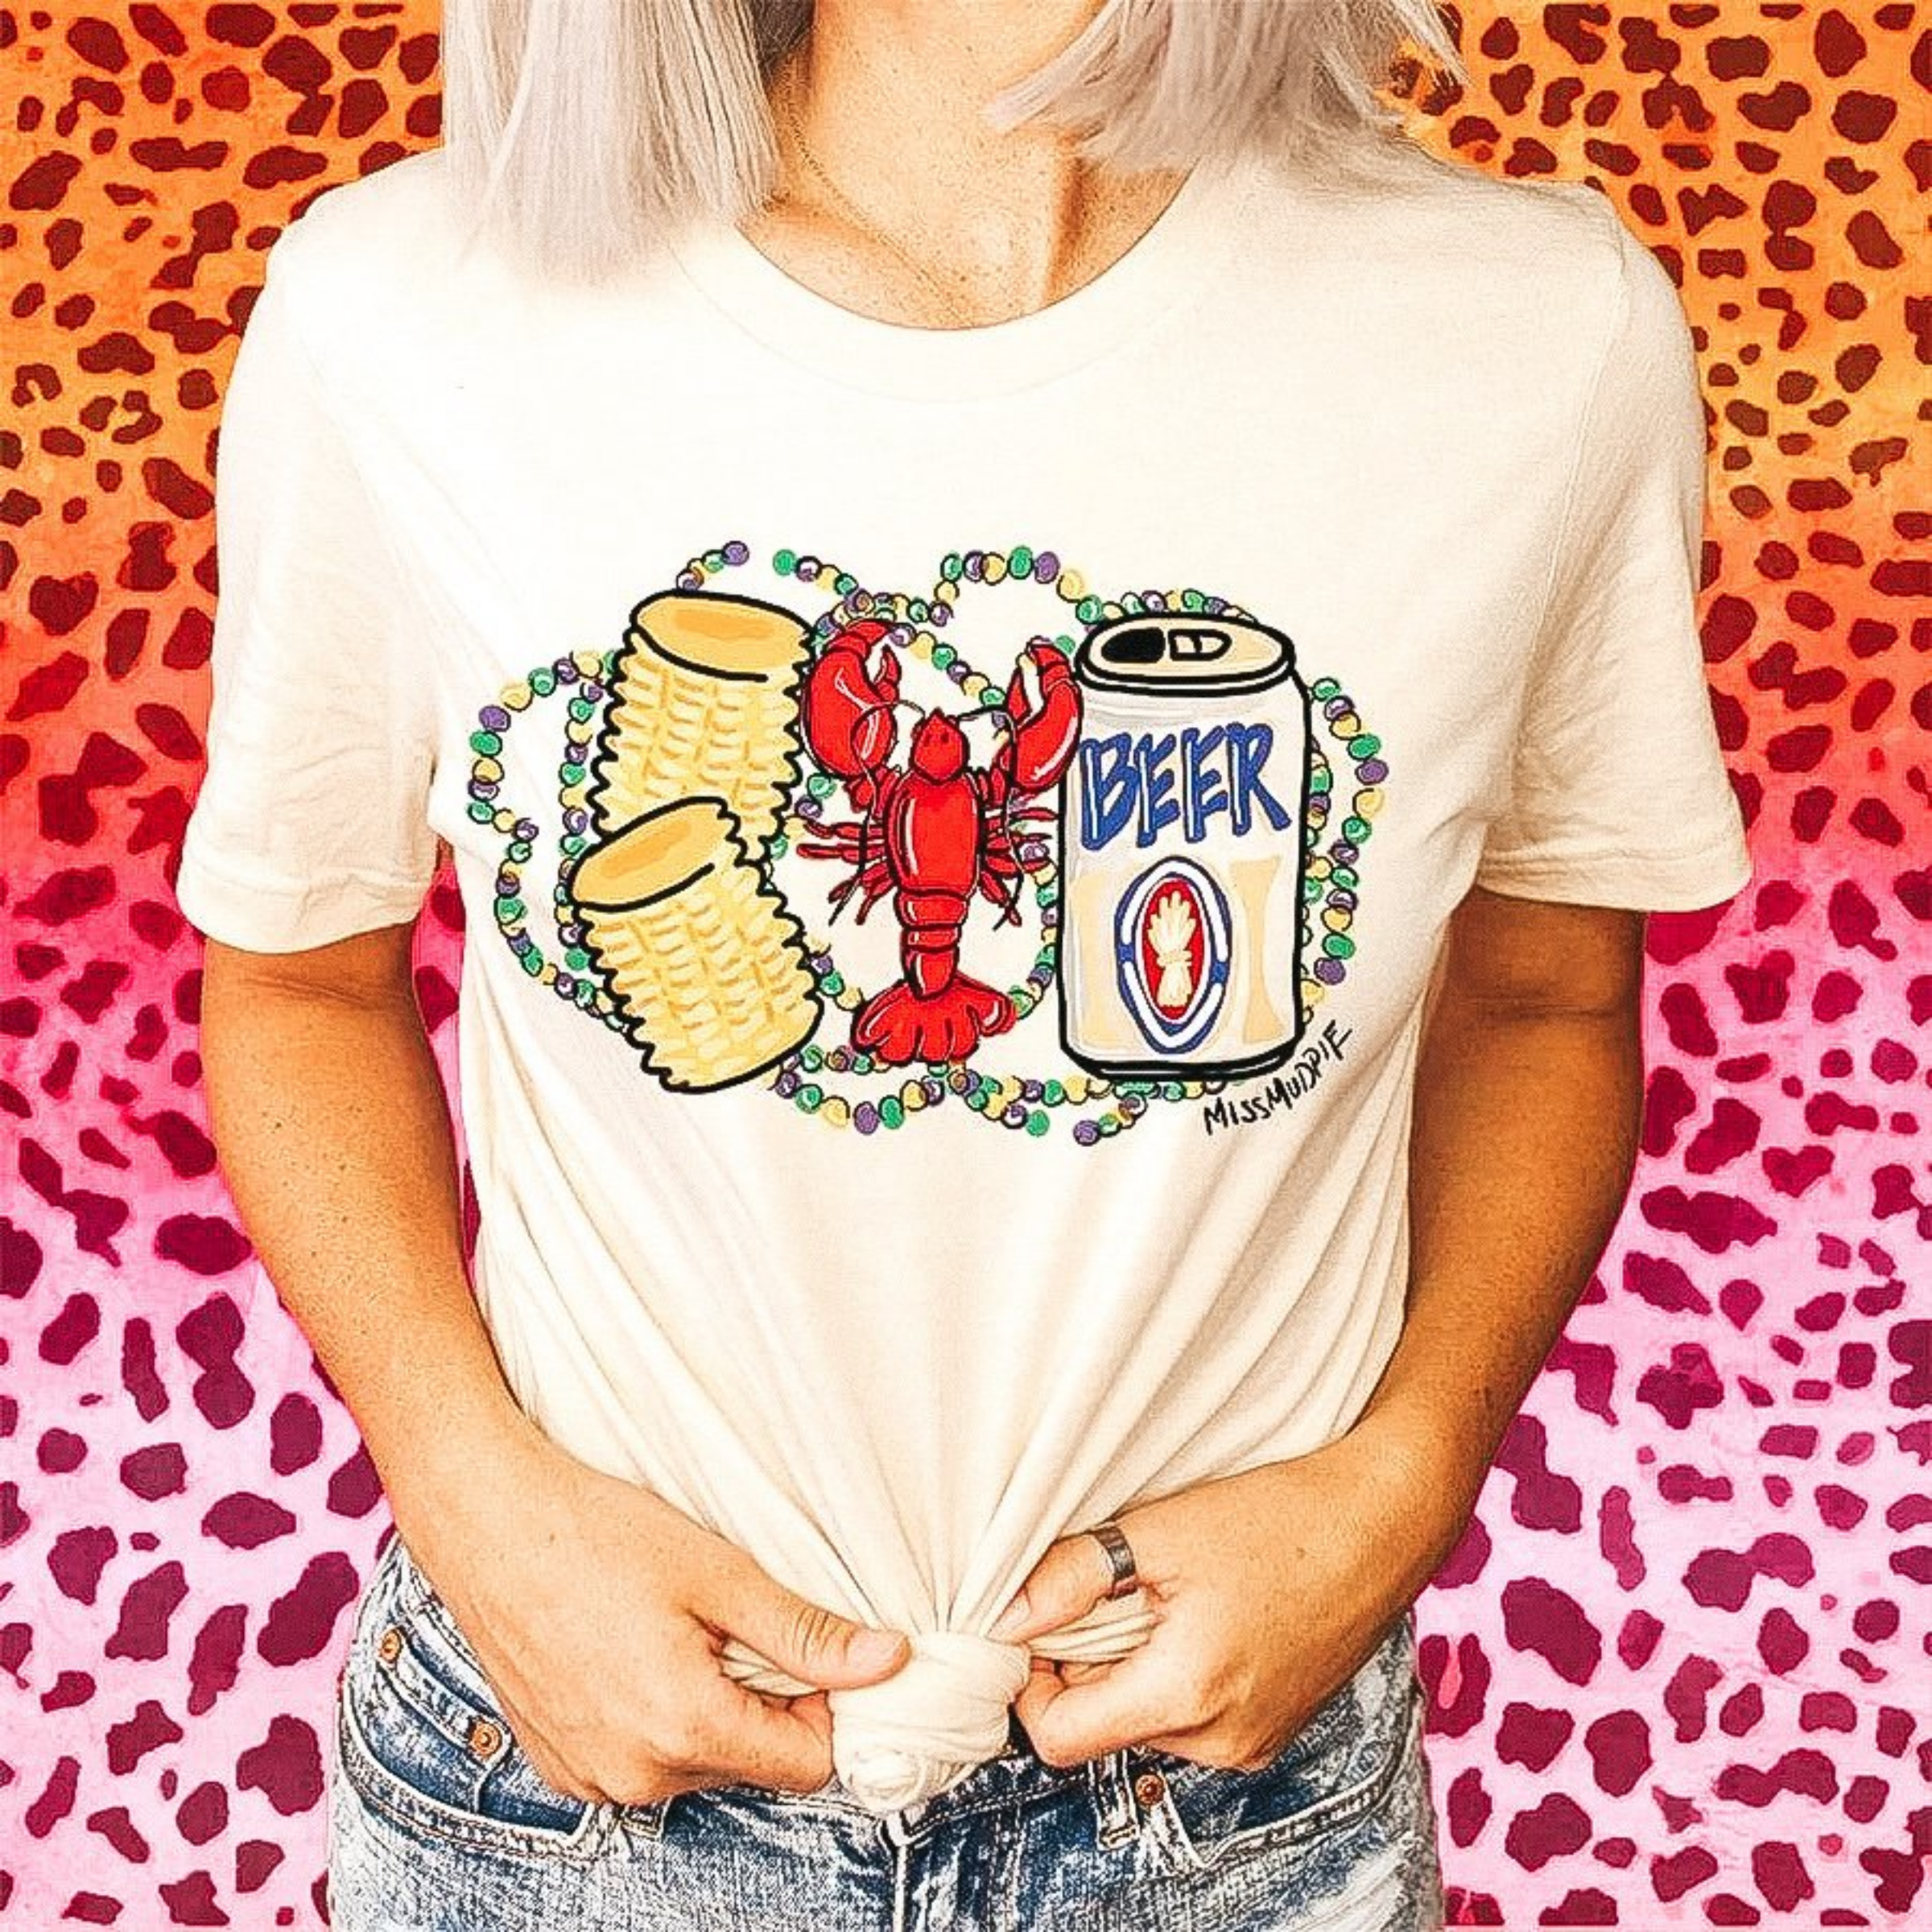 A cream colored crew neck tee shirt. The tee shirt has a graphic of corn, a crawfish, and a beer can. The graphic has mardi gras beads around it. 